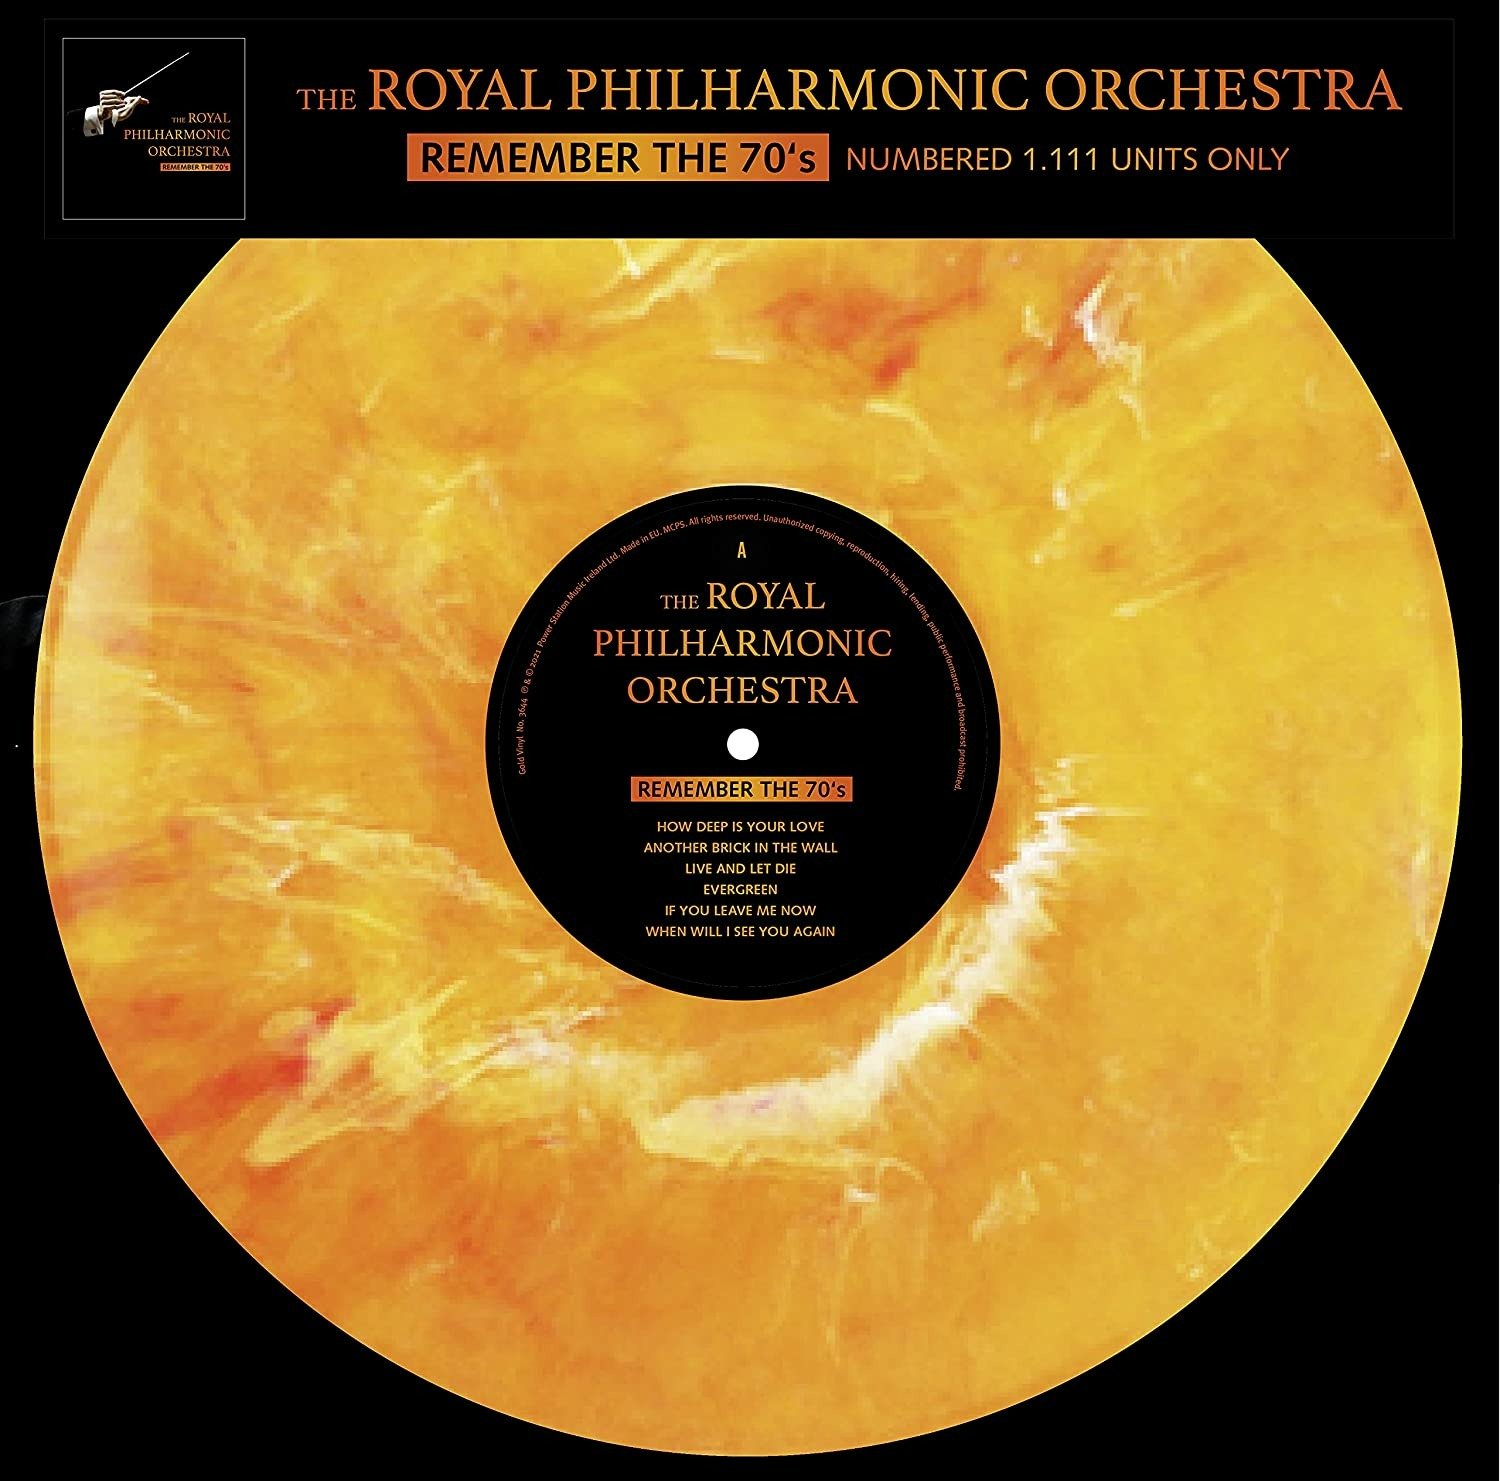 CD Shop - ROYAL PHILHARMONIC ORCHESTRA REMEMBER THE 70S